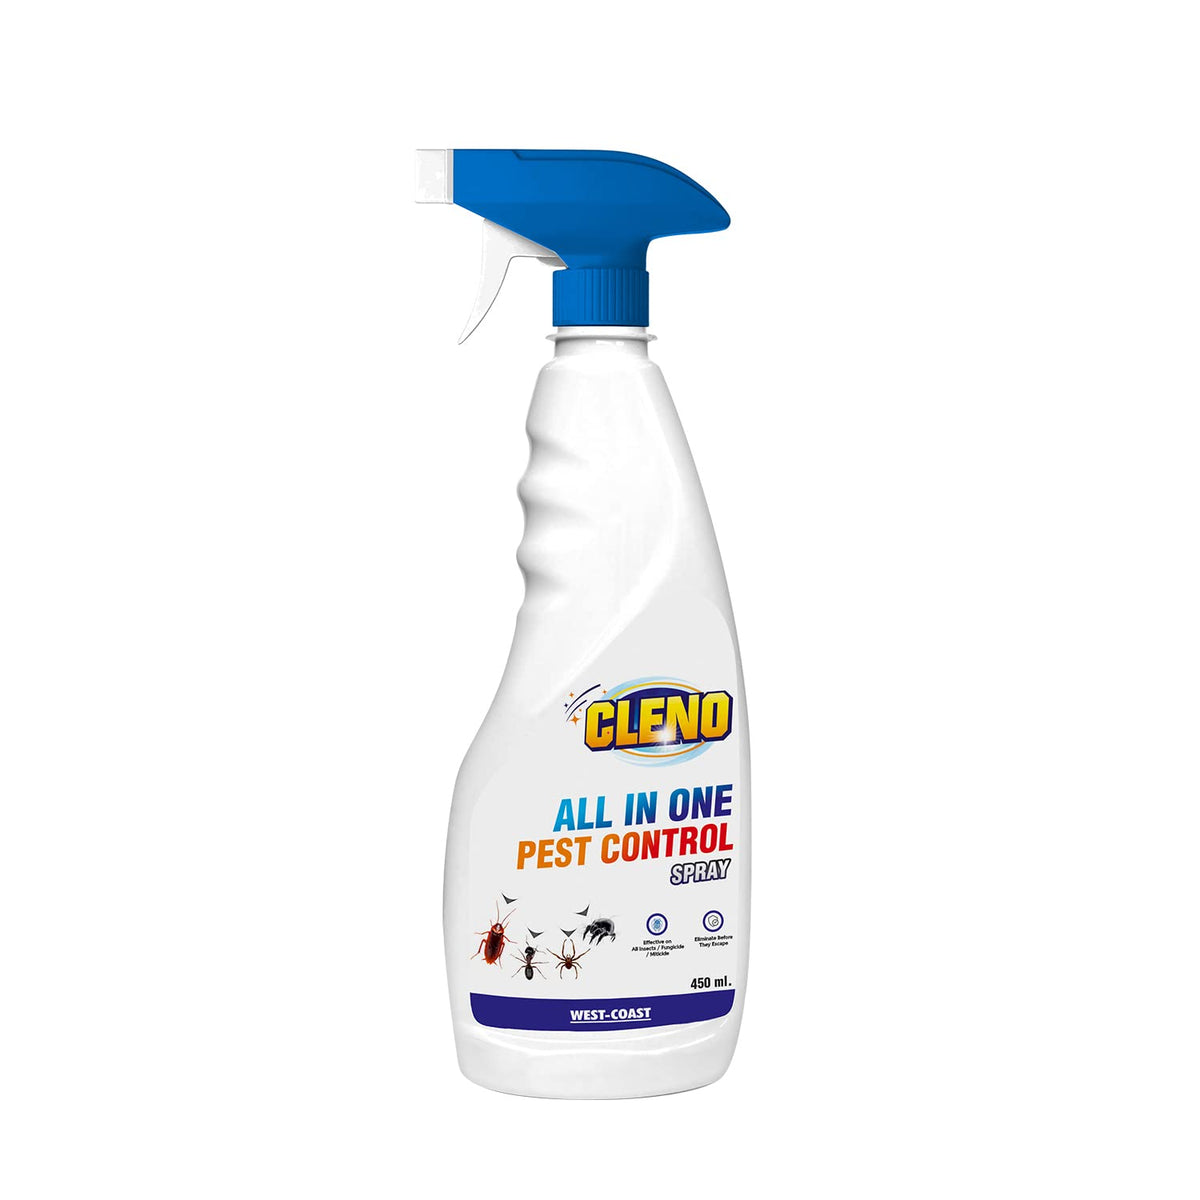 Cleno All in One Pest Control Spray | for Pest, Fungicide, Dust Mite, Bedbugs, Ants, Termites– 450 ml (Ready to Use)